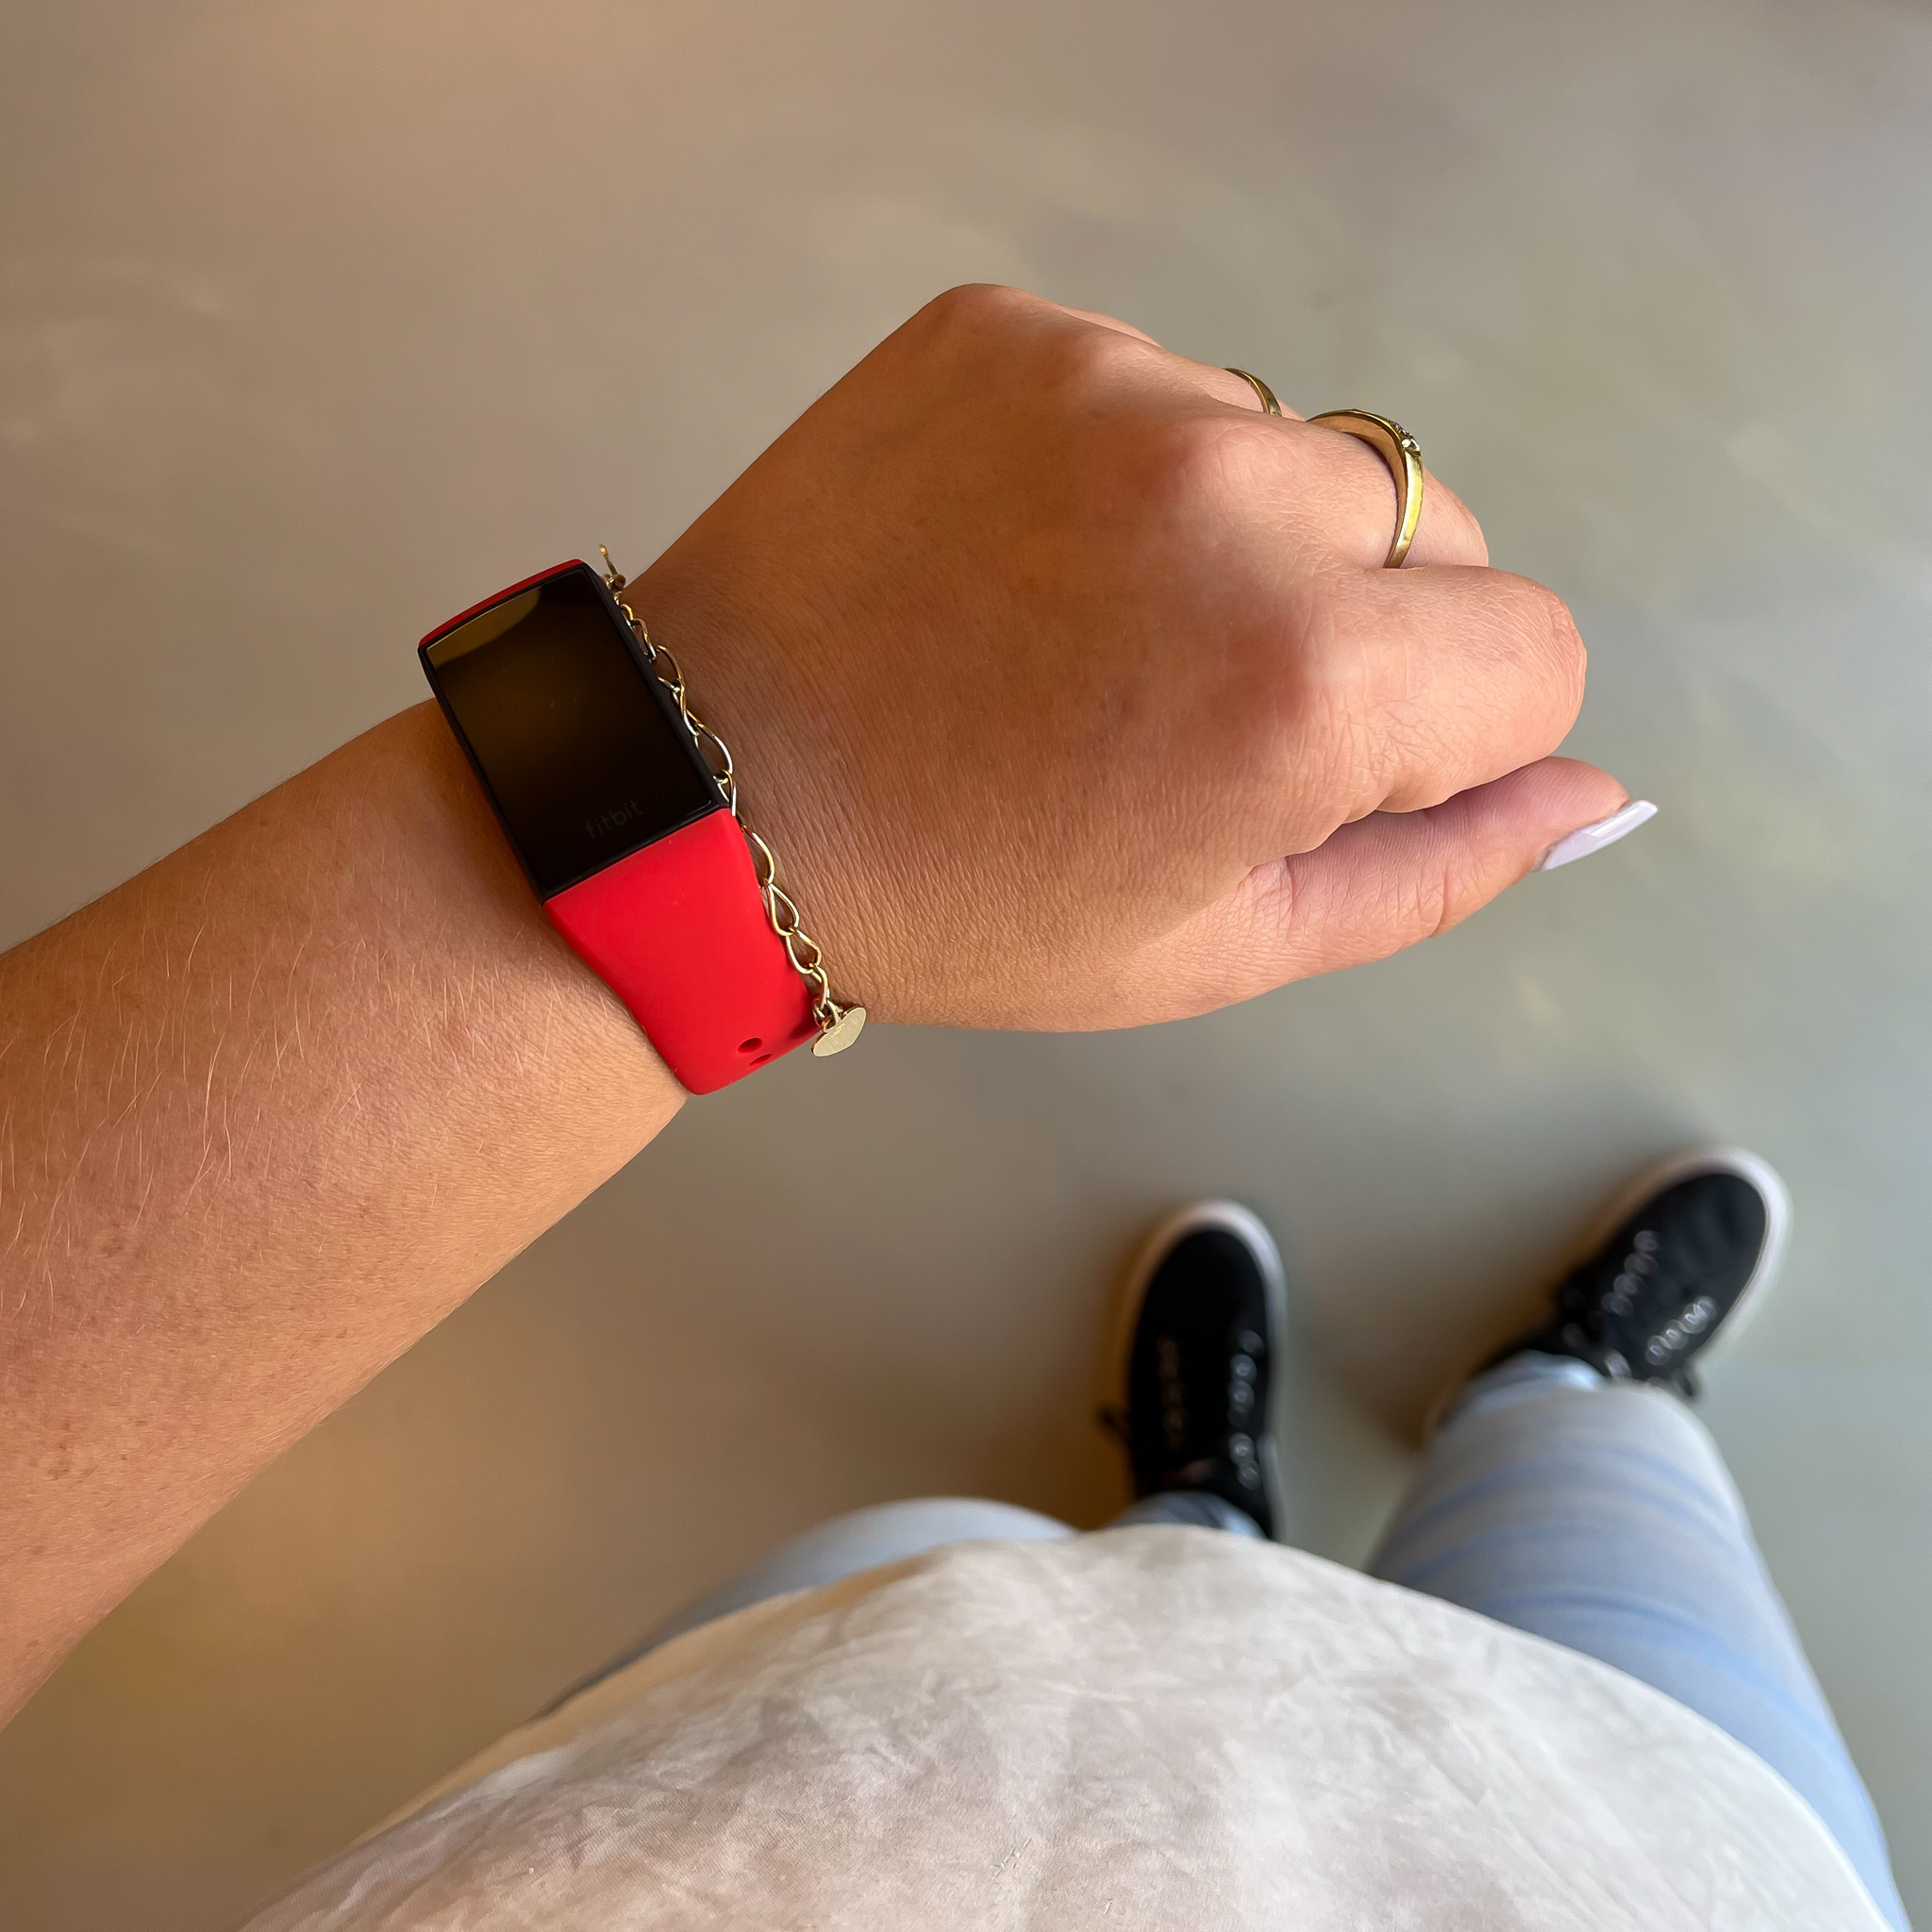 Fitbit Charge 3 & 4 sport band - rood